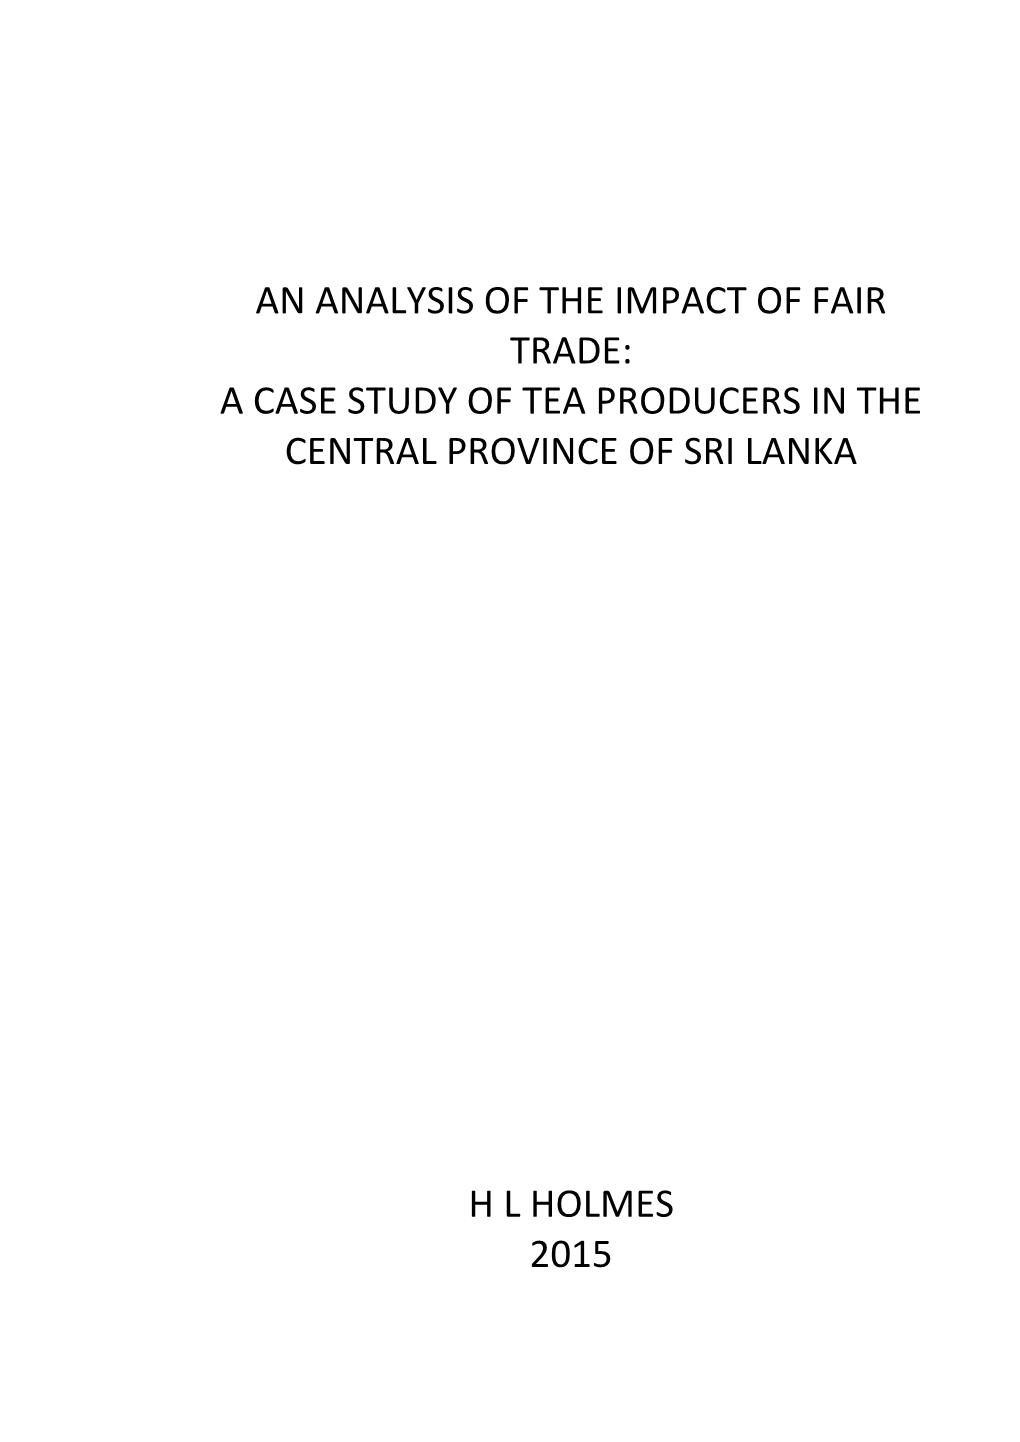 An Analysis of the Impact of Fair Trade: a Case Study of Tea Producers in the Central Province of Sri Lanka